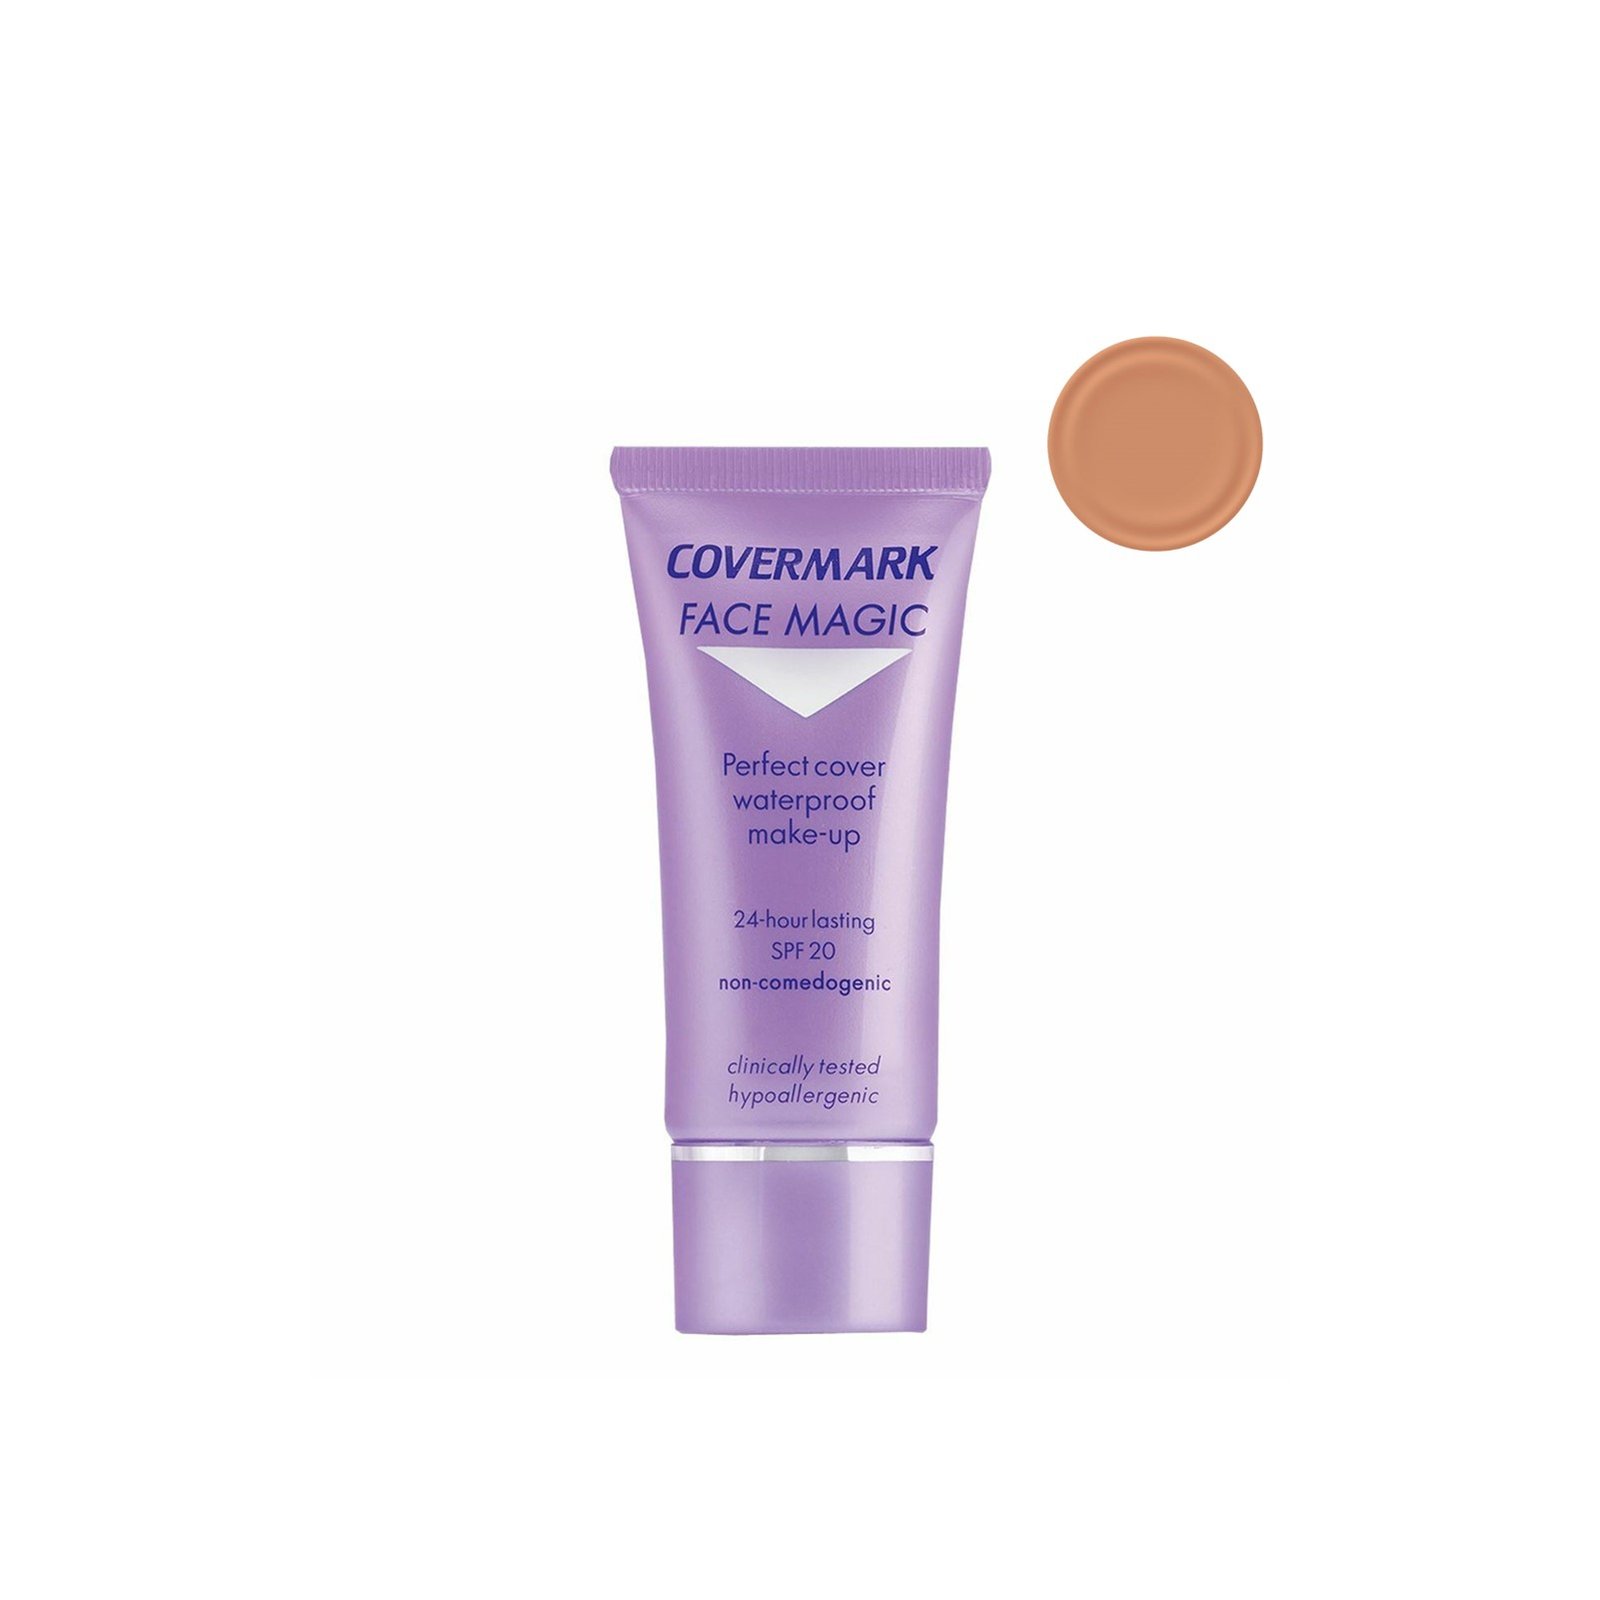 Covermark Face Magic Perfect Cover Waterproof Make-Up SPF20 6 30ml